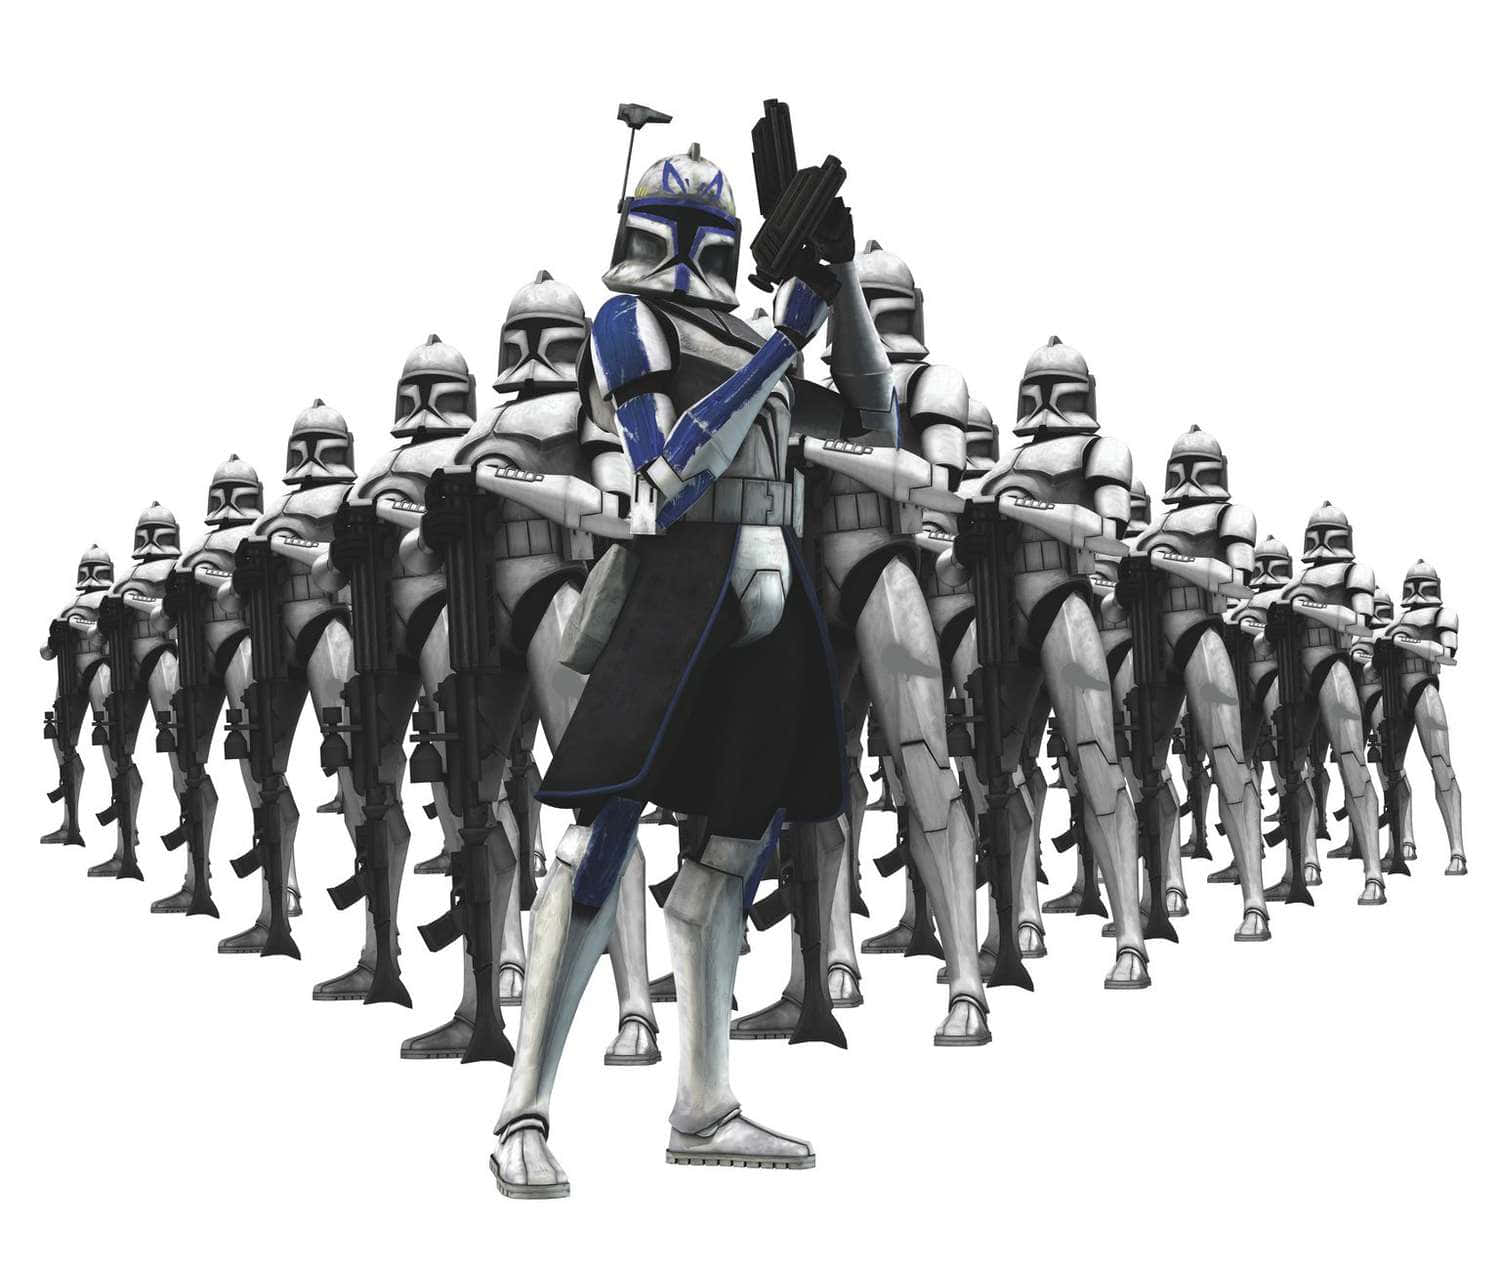 “The Clone Army is an essential asset in the fight against the Separatists.” Wallpaper